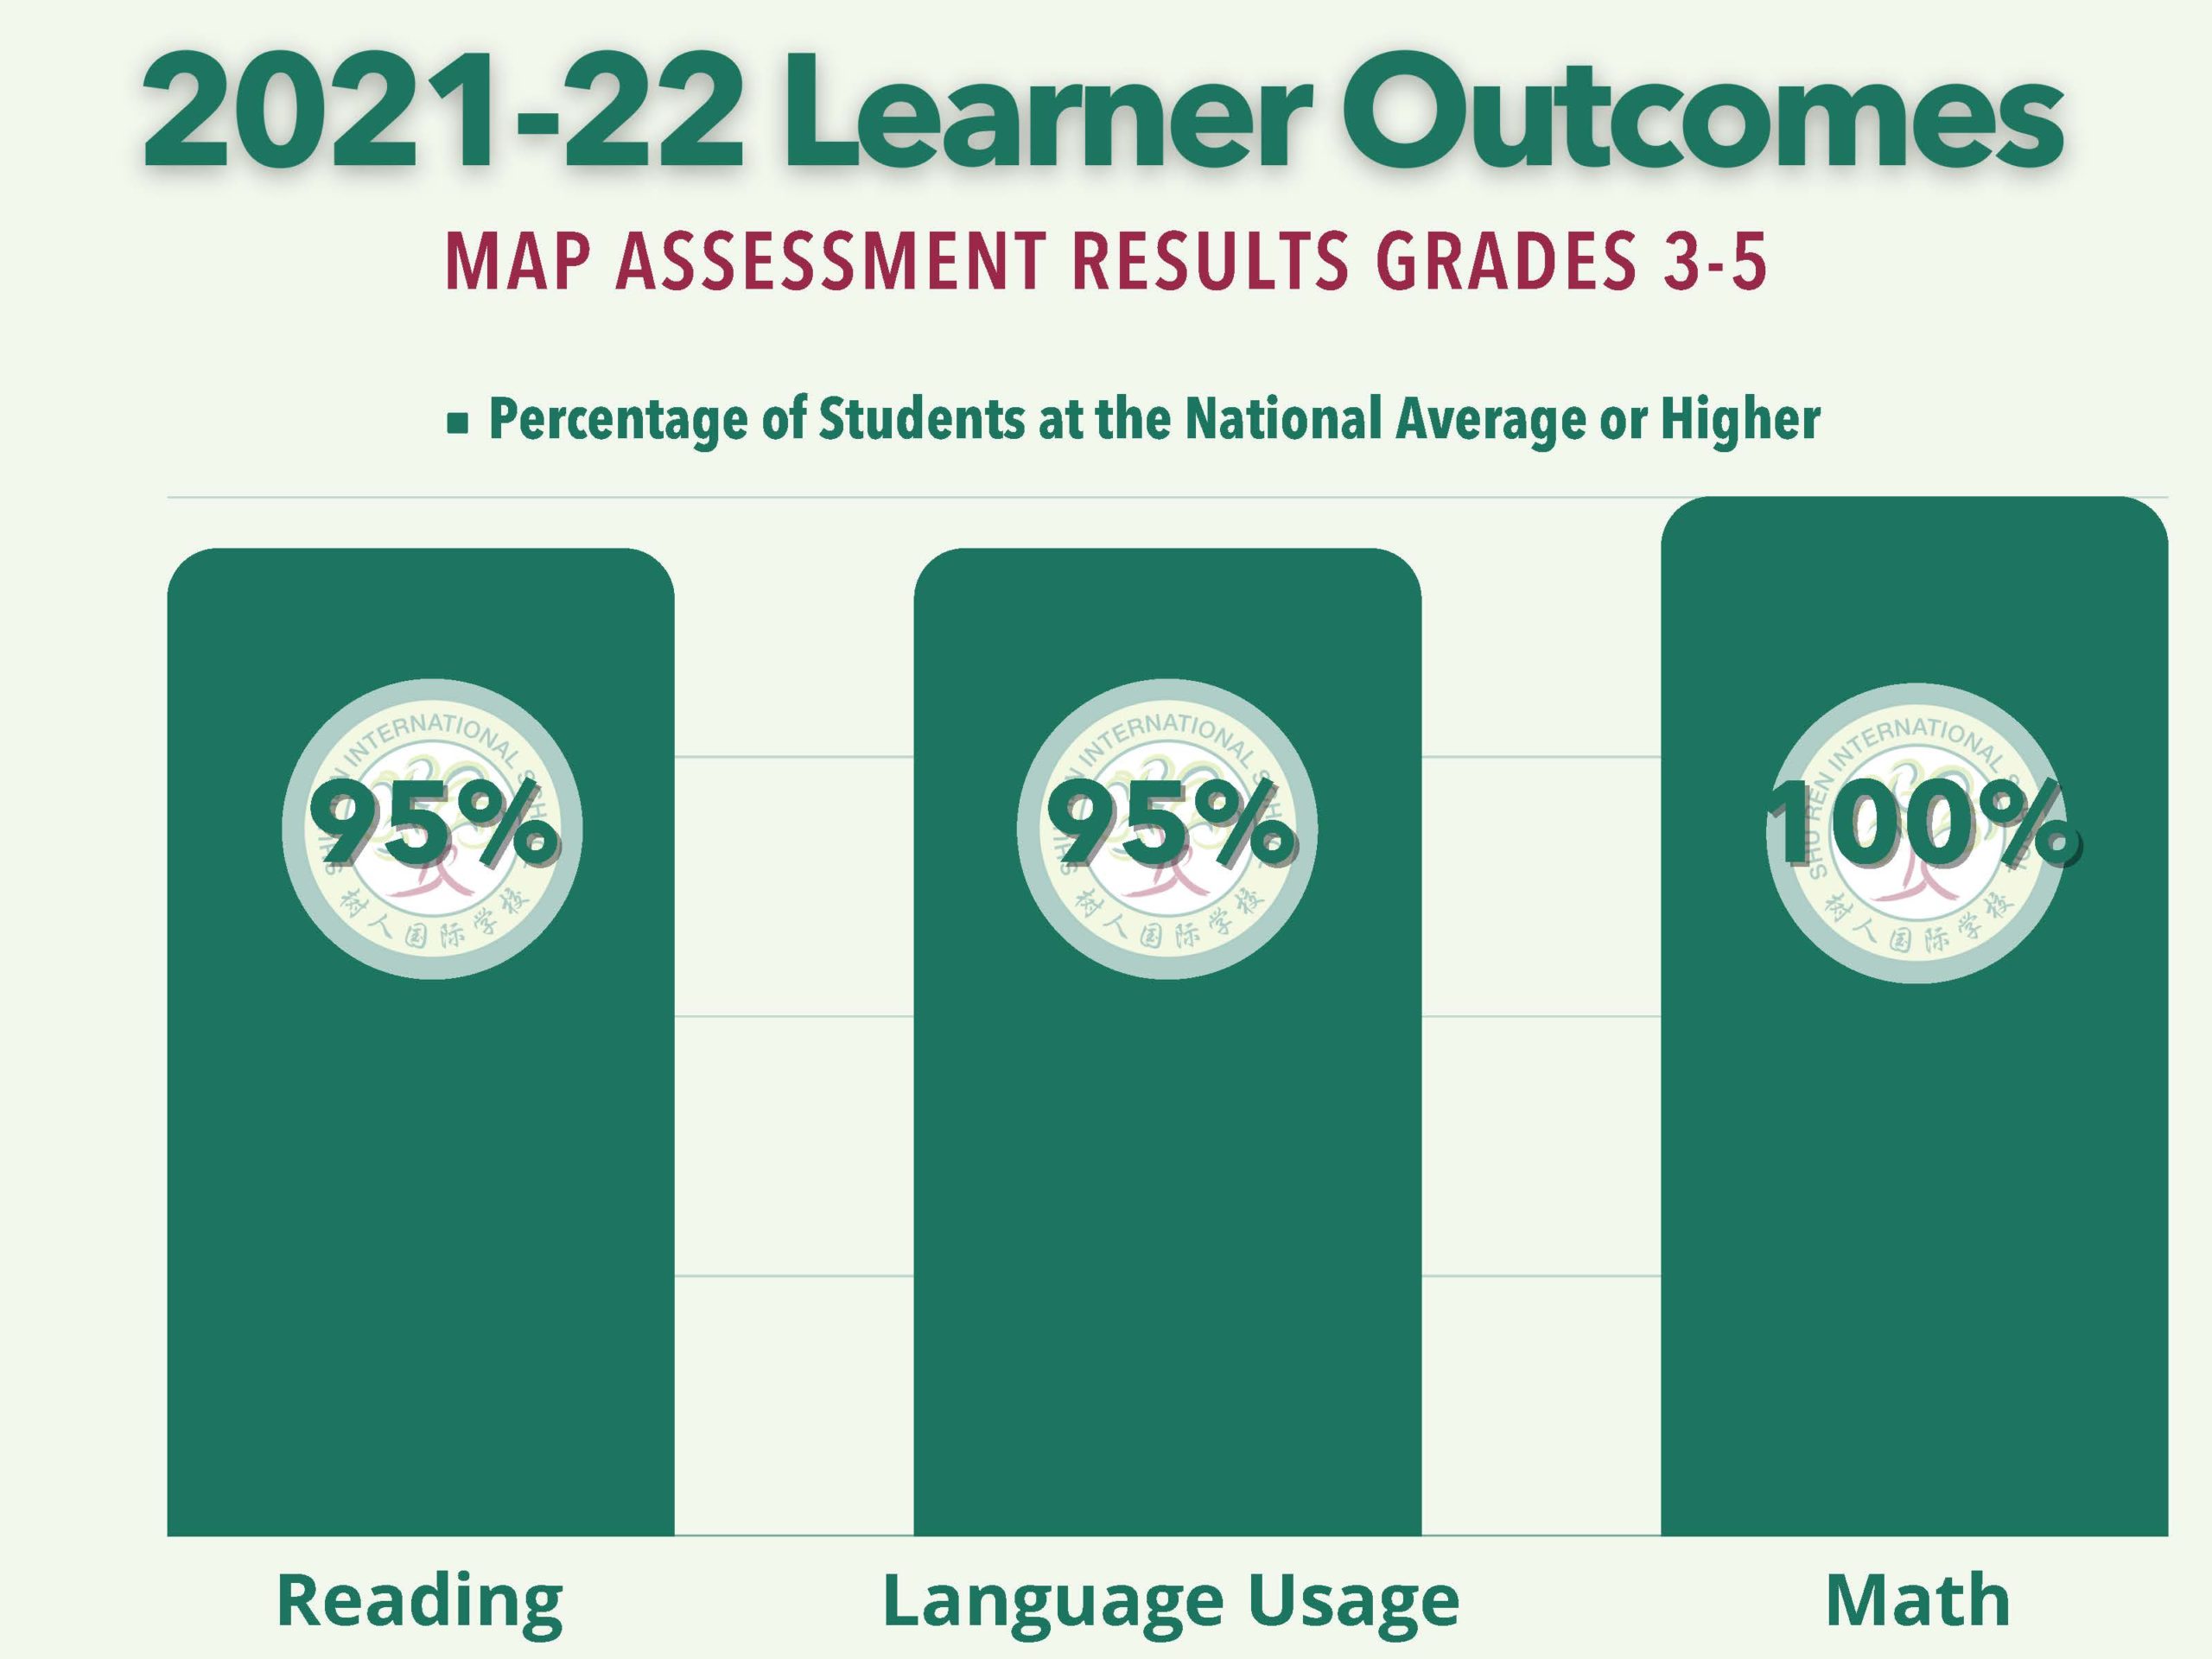 Shu Ren Learner Outcomes - MAP Assessment Results